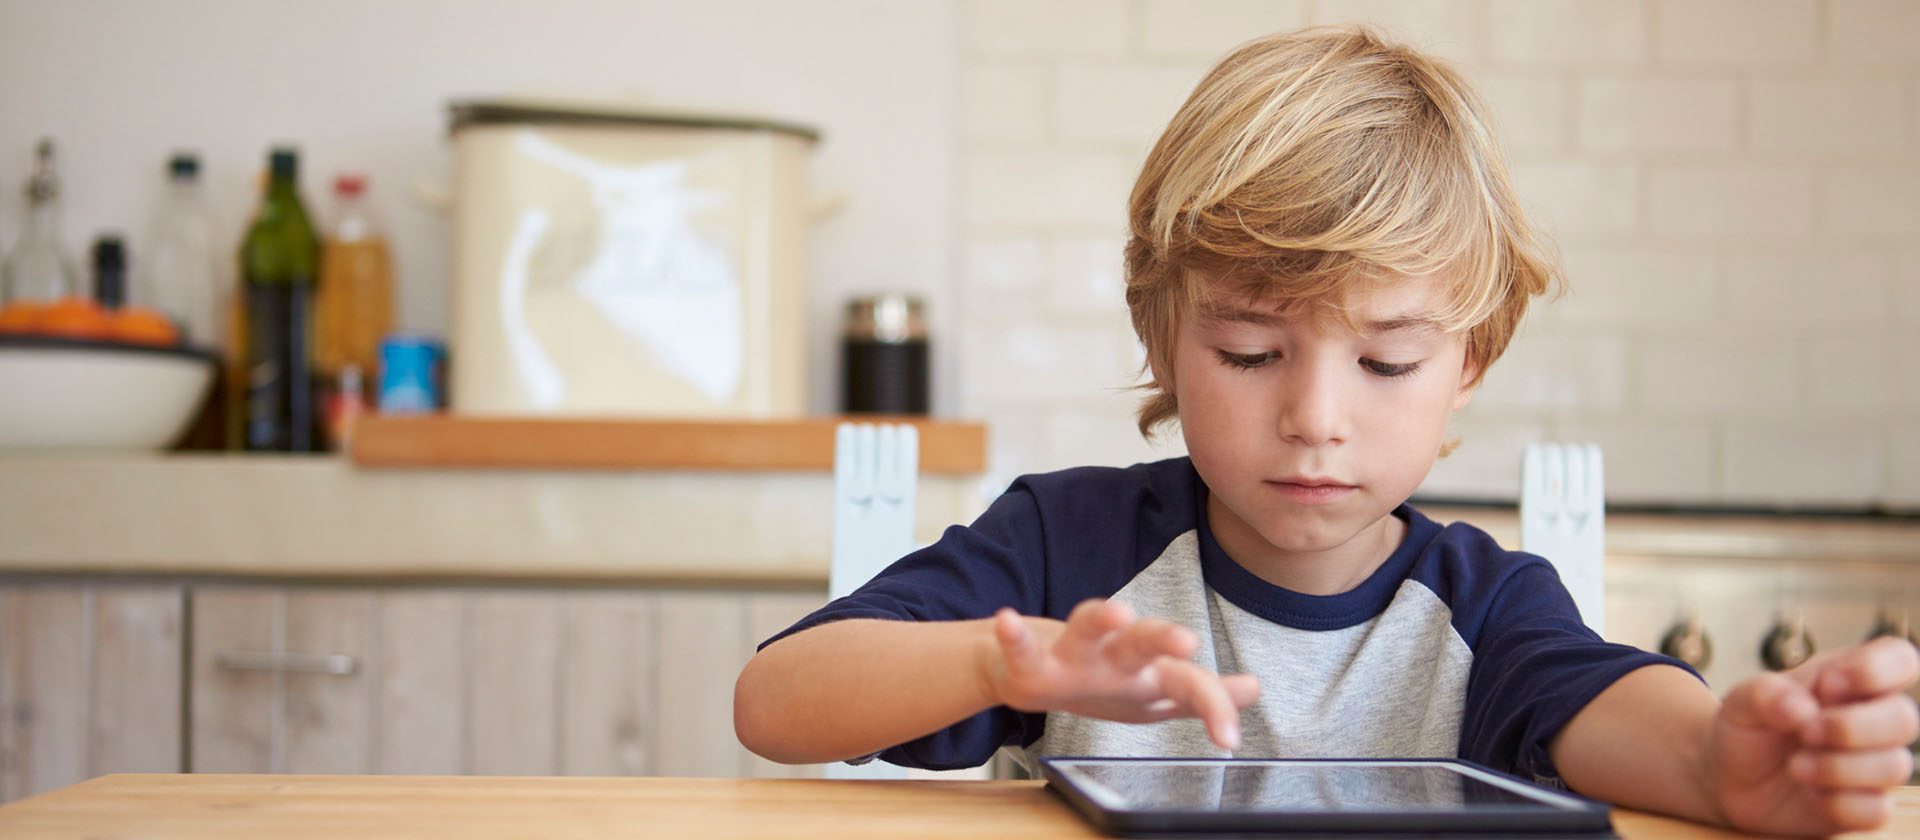 Young boy sitting at table with ipad